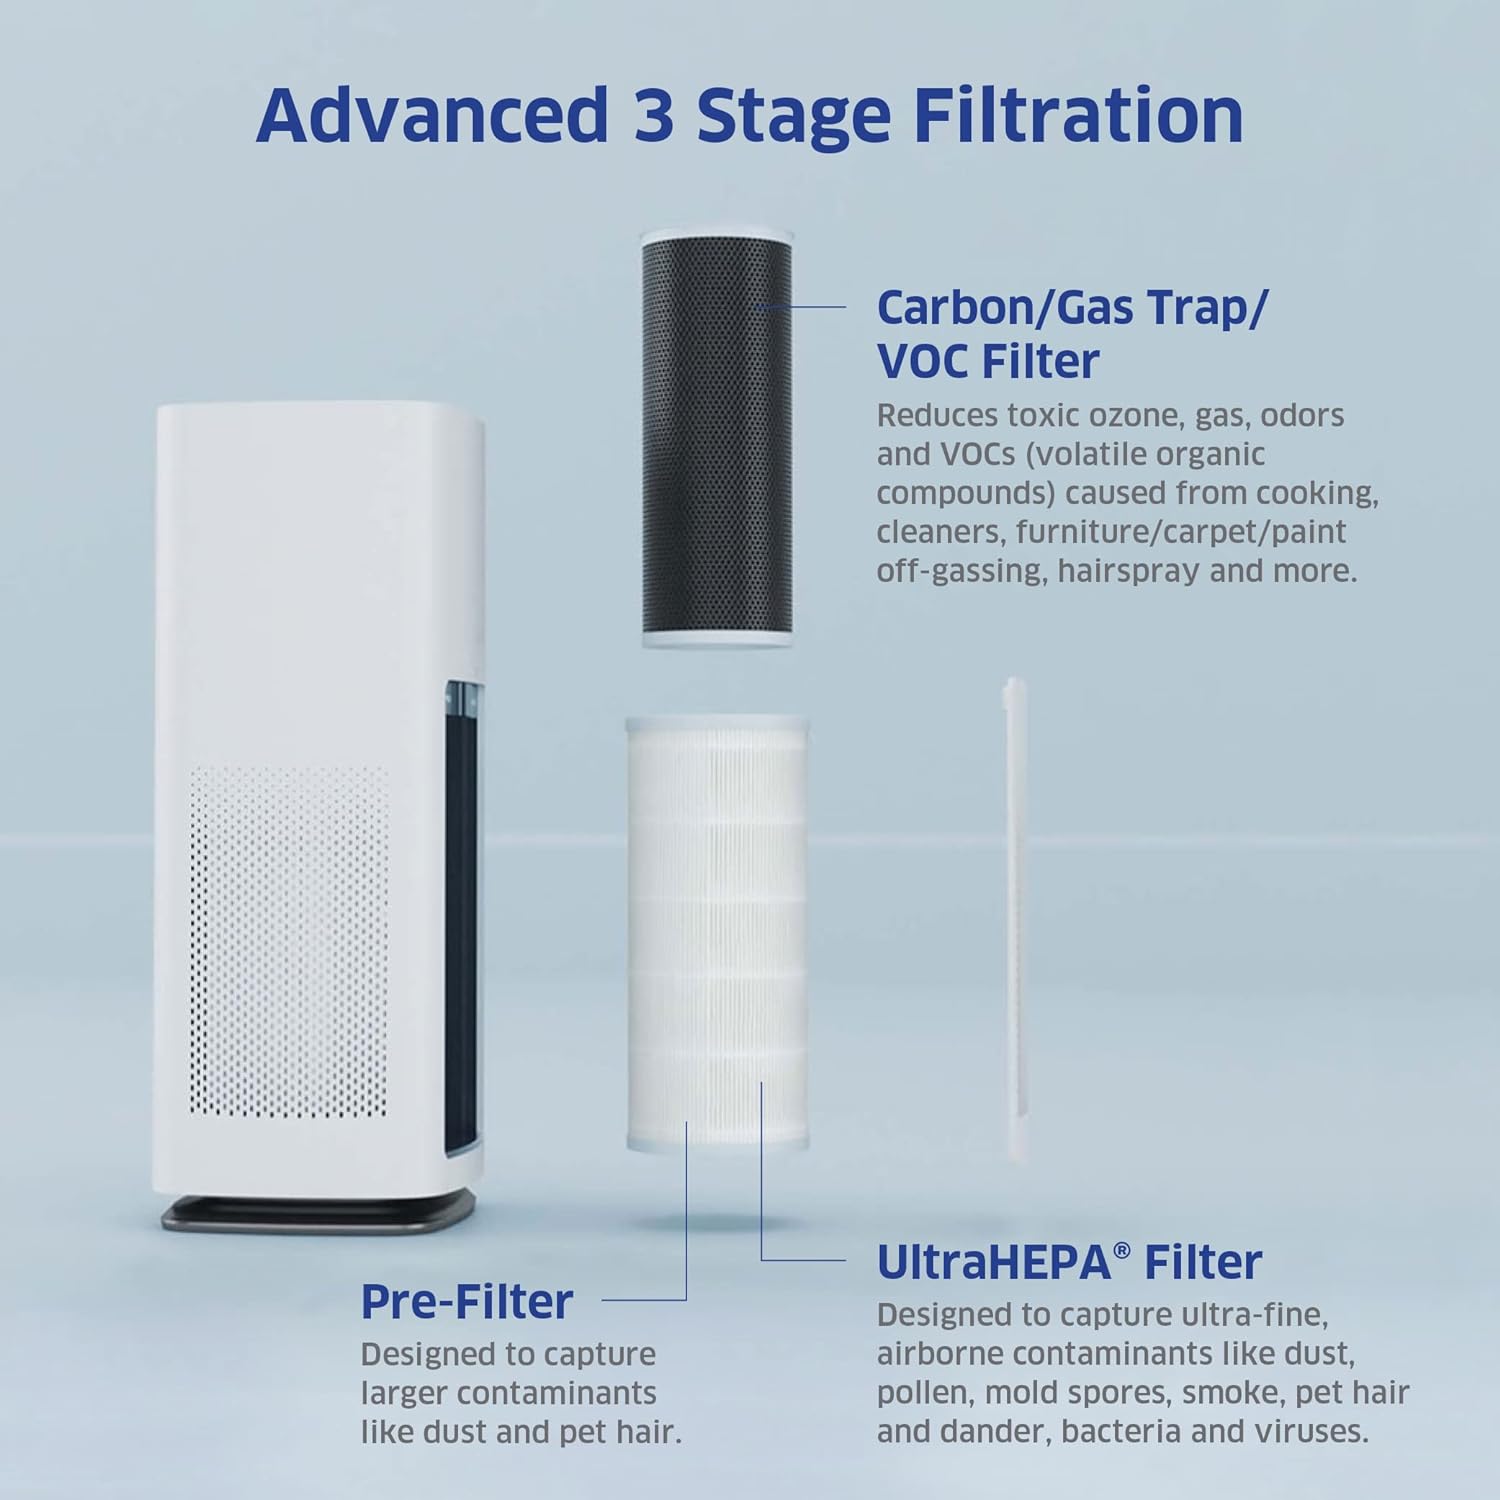 AIRDOCTOR AD1000 Air Purifier Review